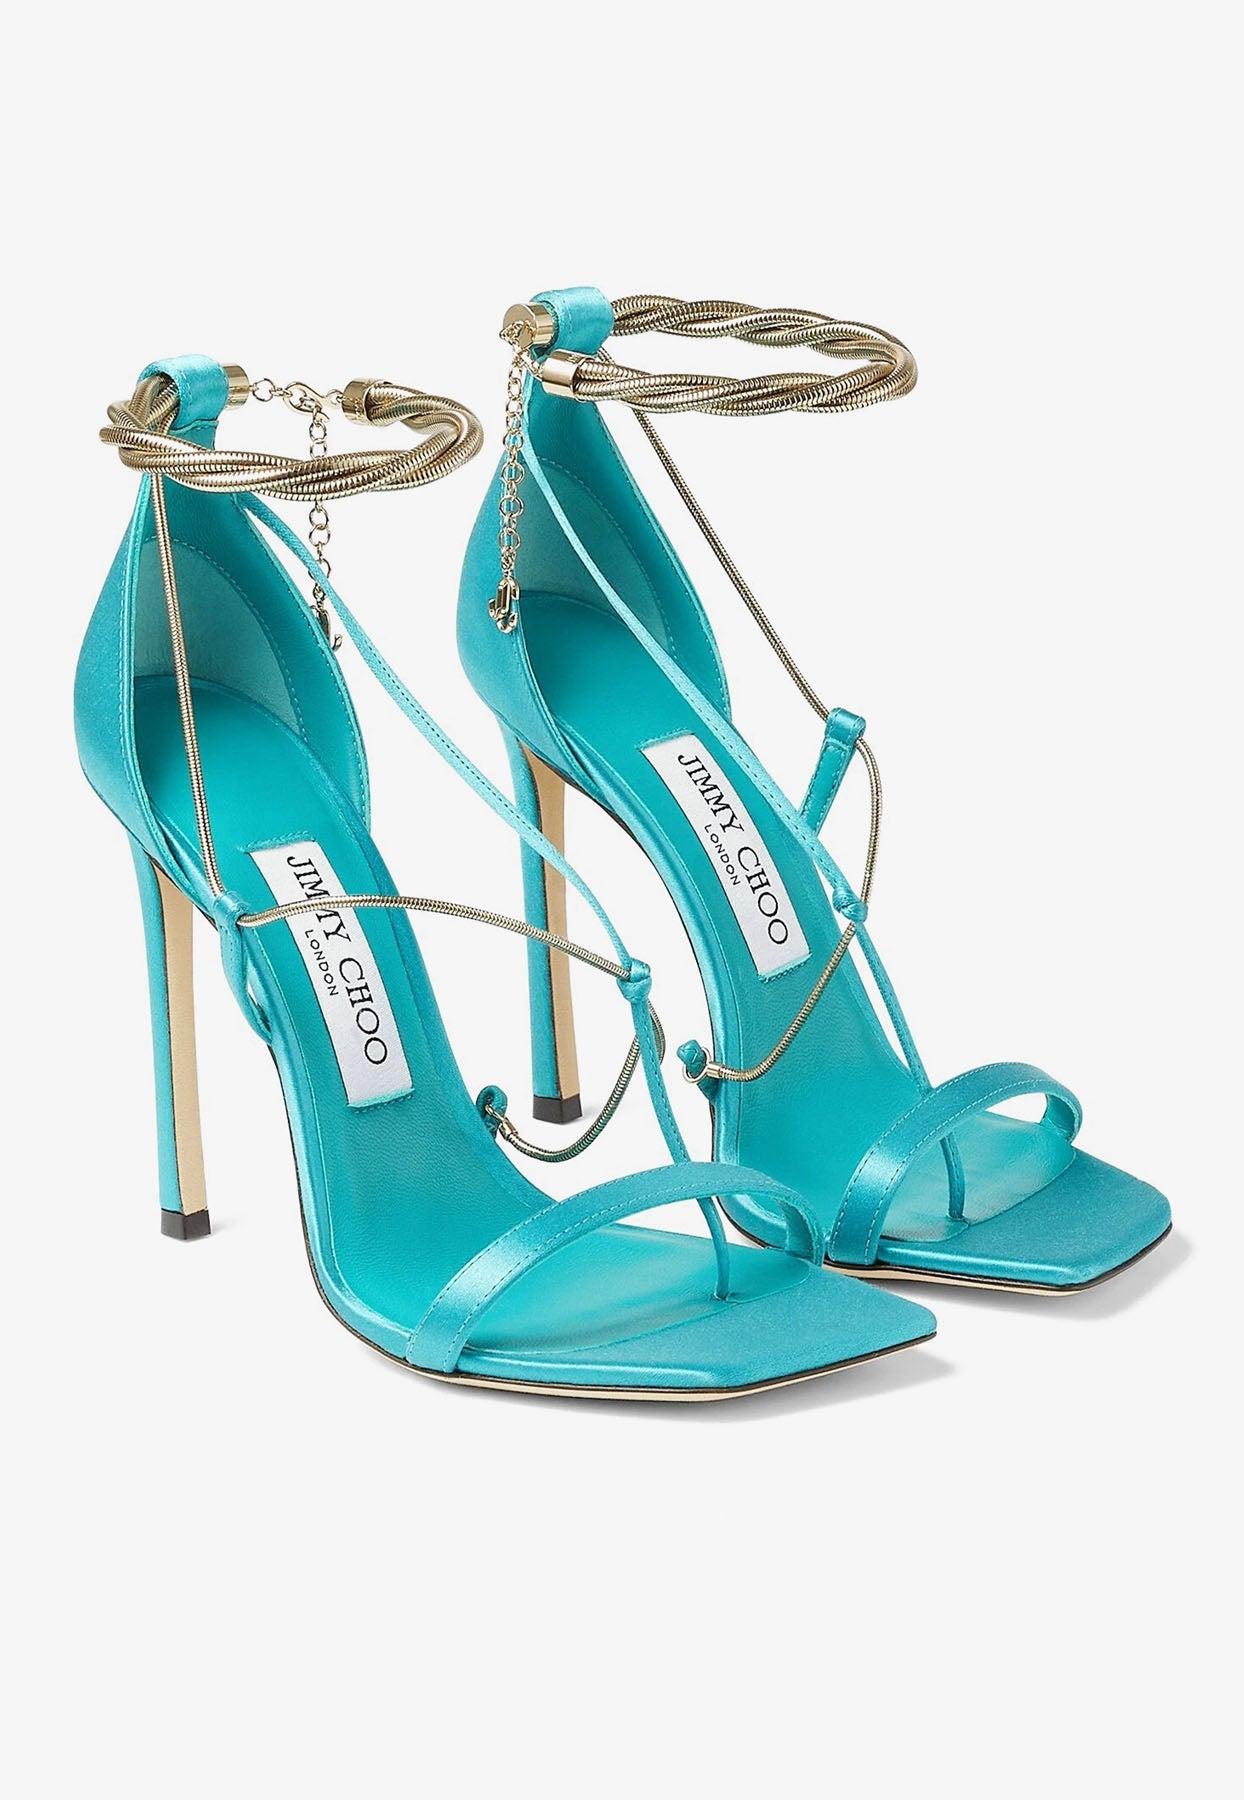 Jimmy Choo Oriana 110 Satin Sandals With Gold Chains in Blue | Lyst